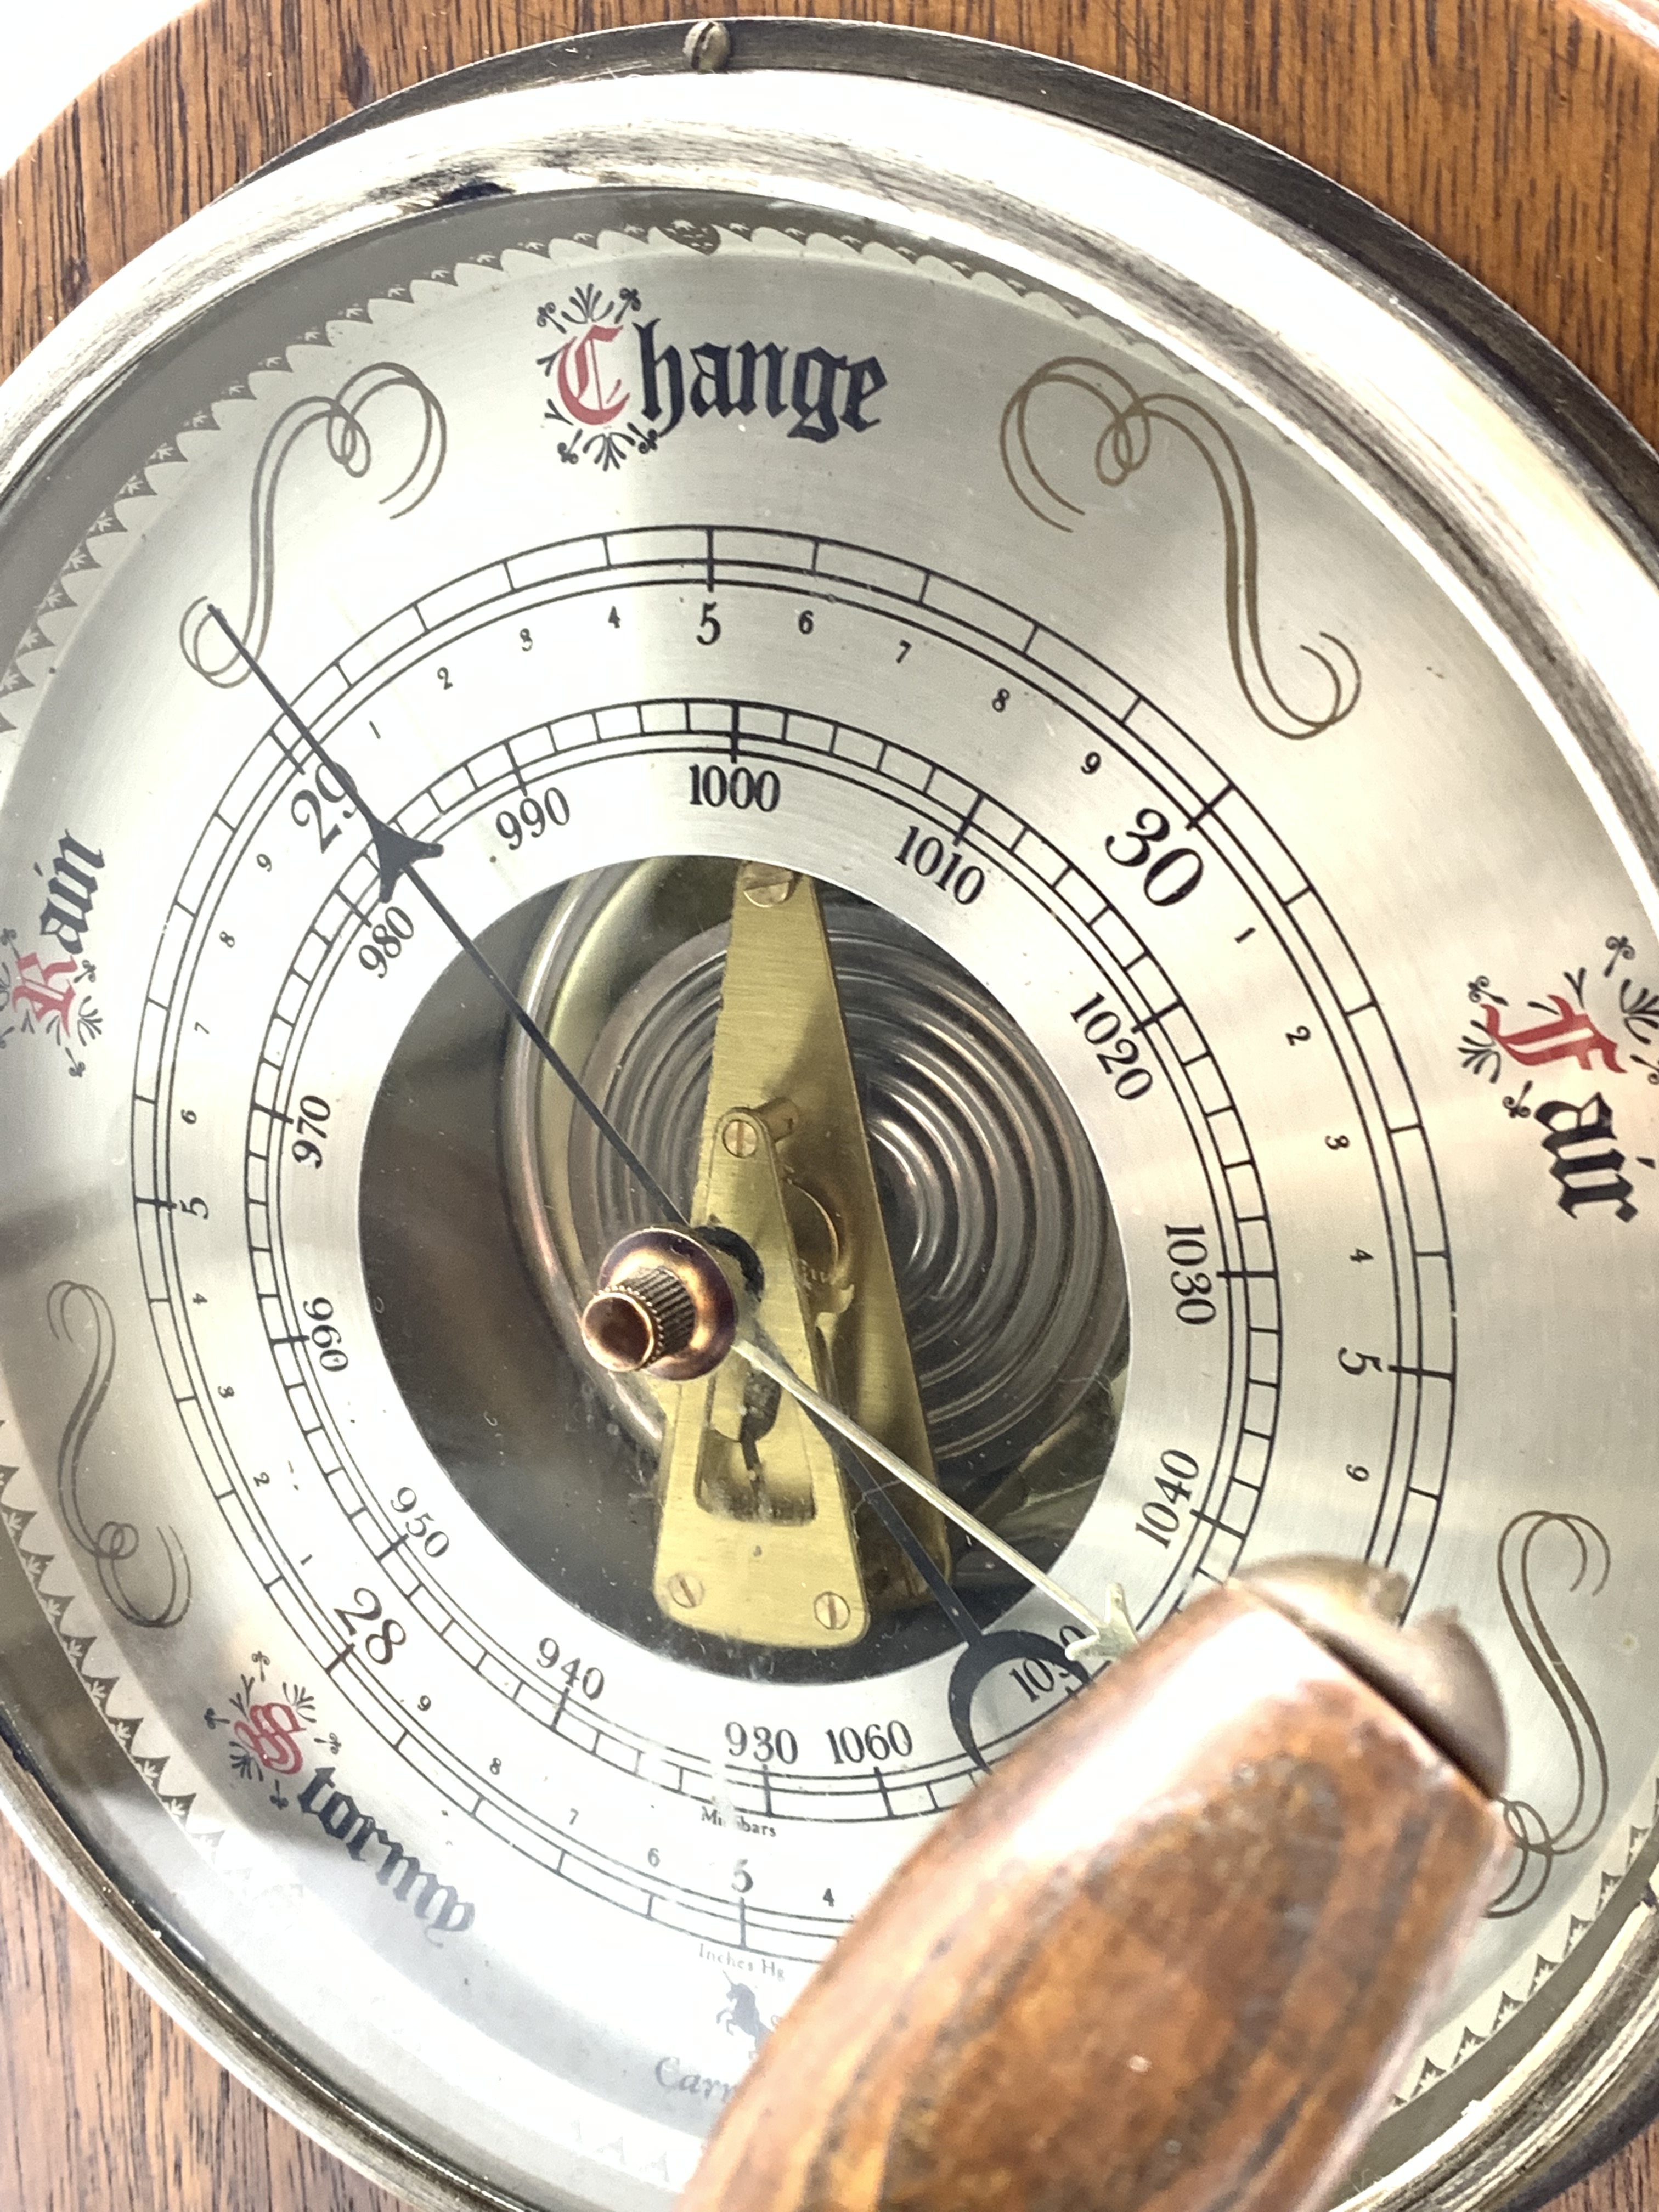 Nautical themed table top lamp and aneroid barometer - Image 3 of 3